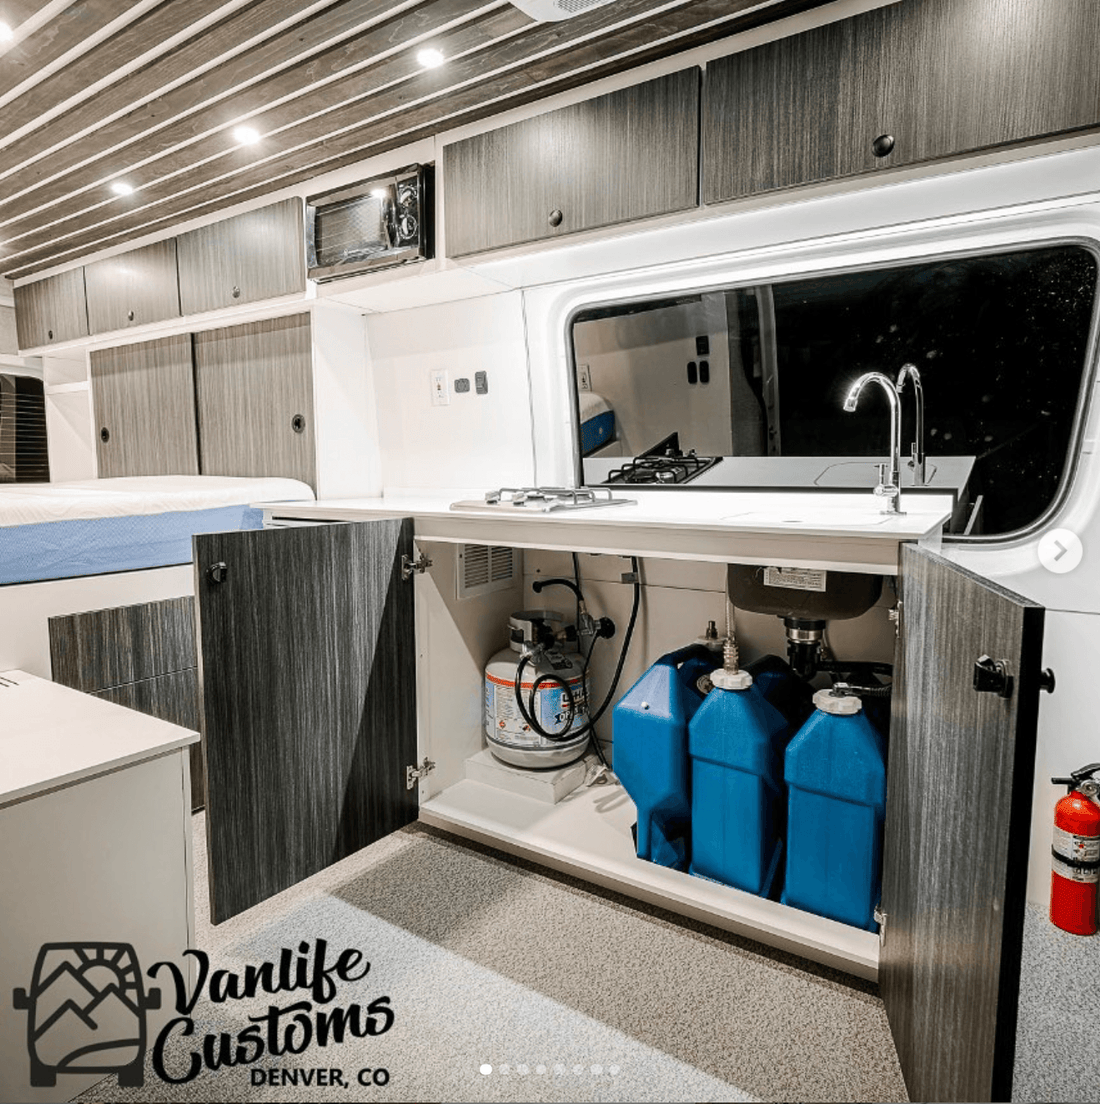 Camper Van Water Systems: Tanks, Toilets, Showers, Water Heaters and Plumbing